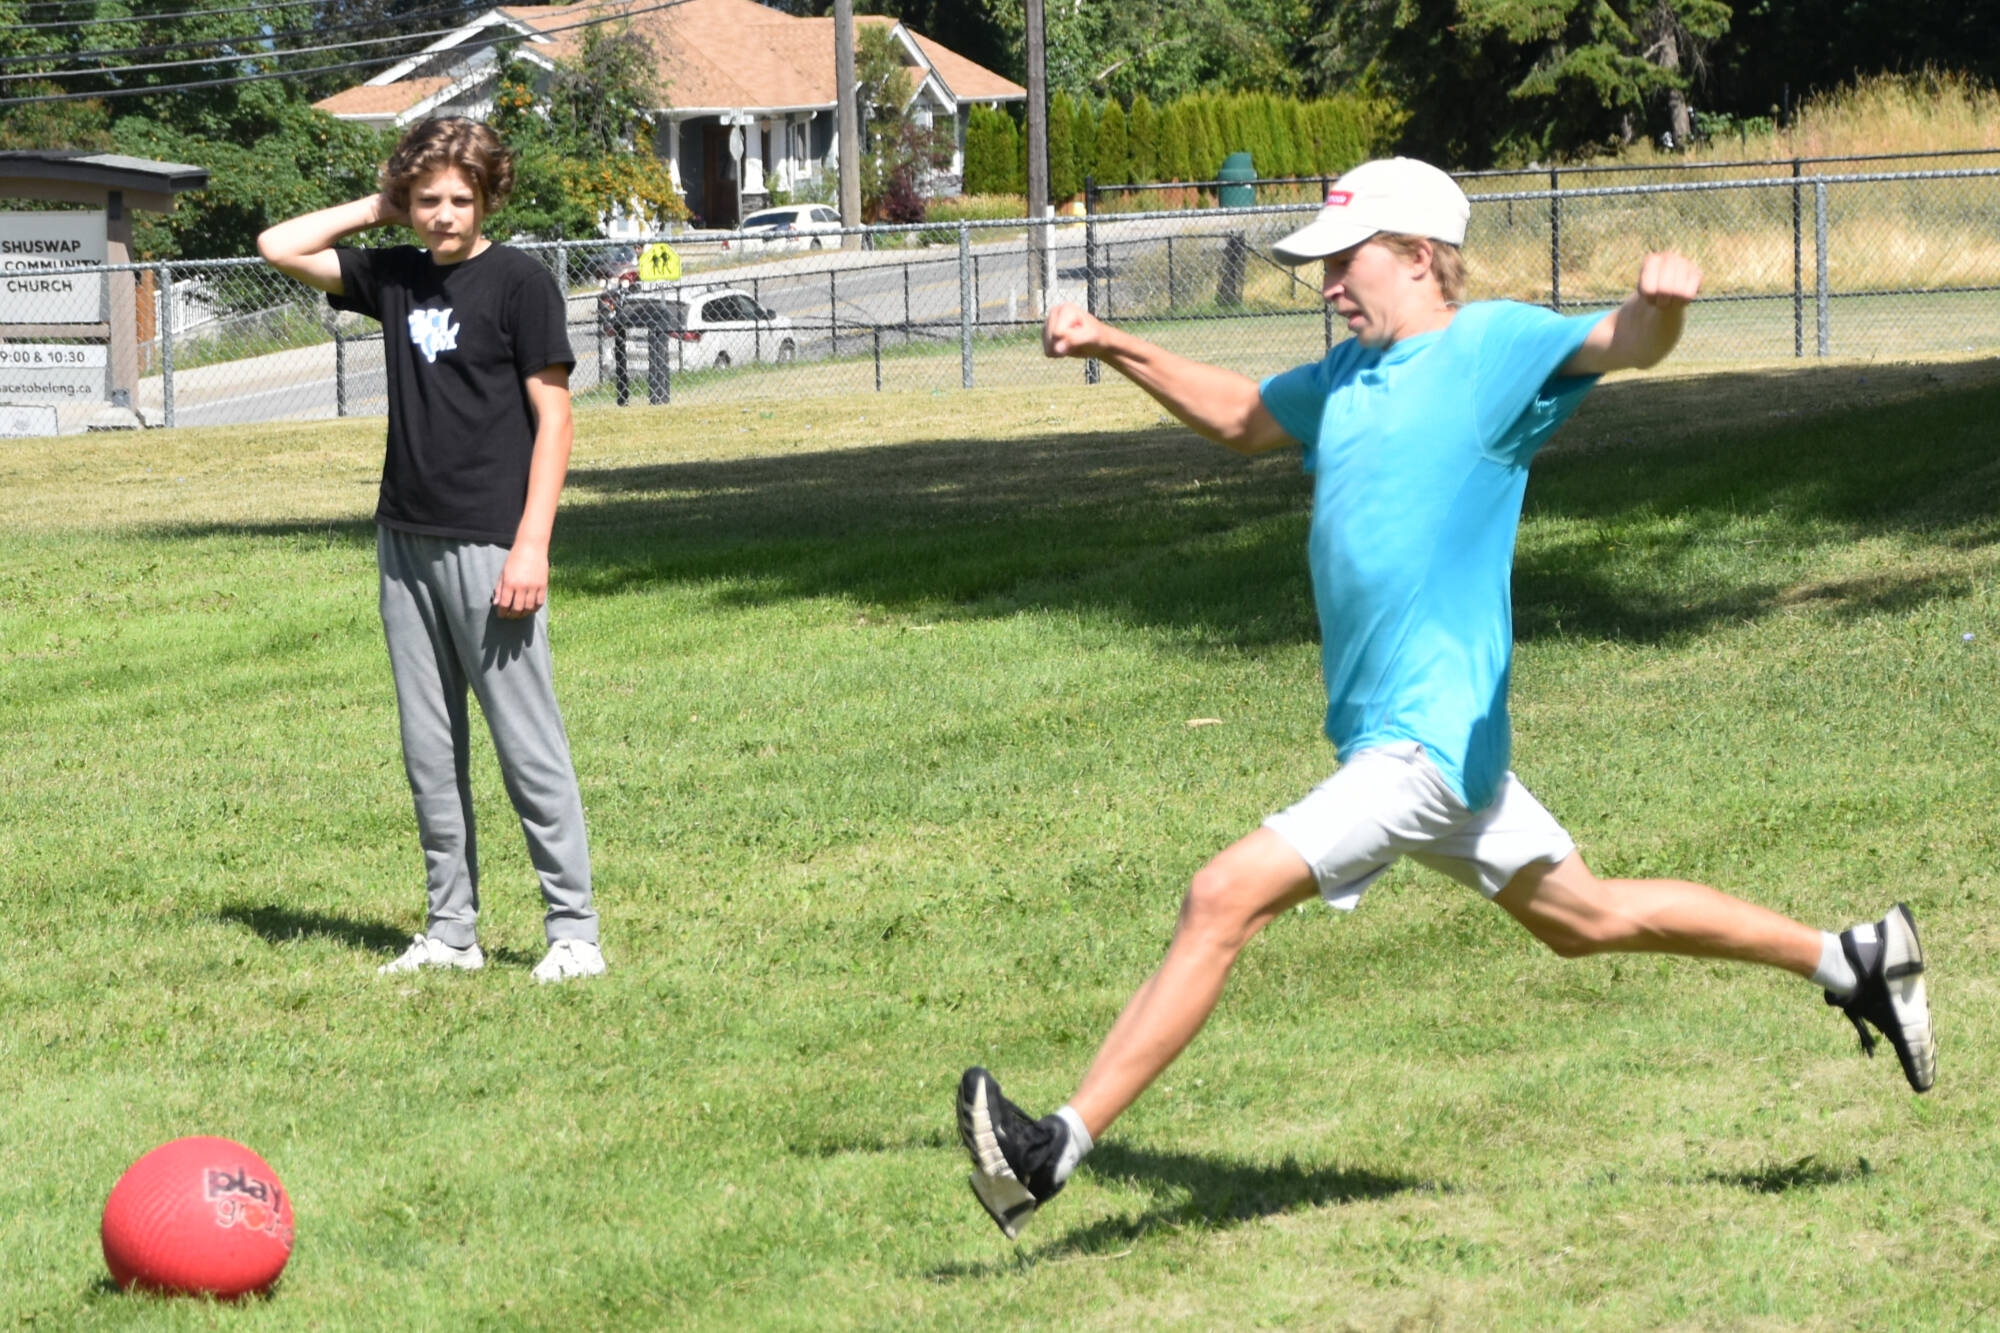 Participants at the BC Hockey Summer Officiating School in Salmon Arm from Aug. 4-8 take time out for a few games of kickball on Aug. 5, 2022. (Martha Wickett-Salmon Arm Observer)